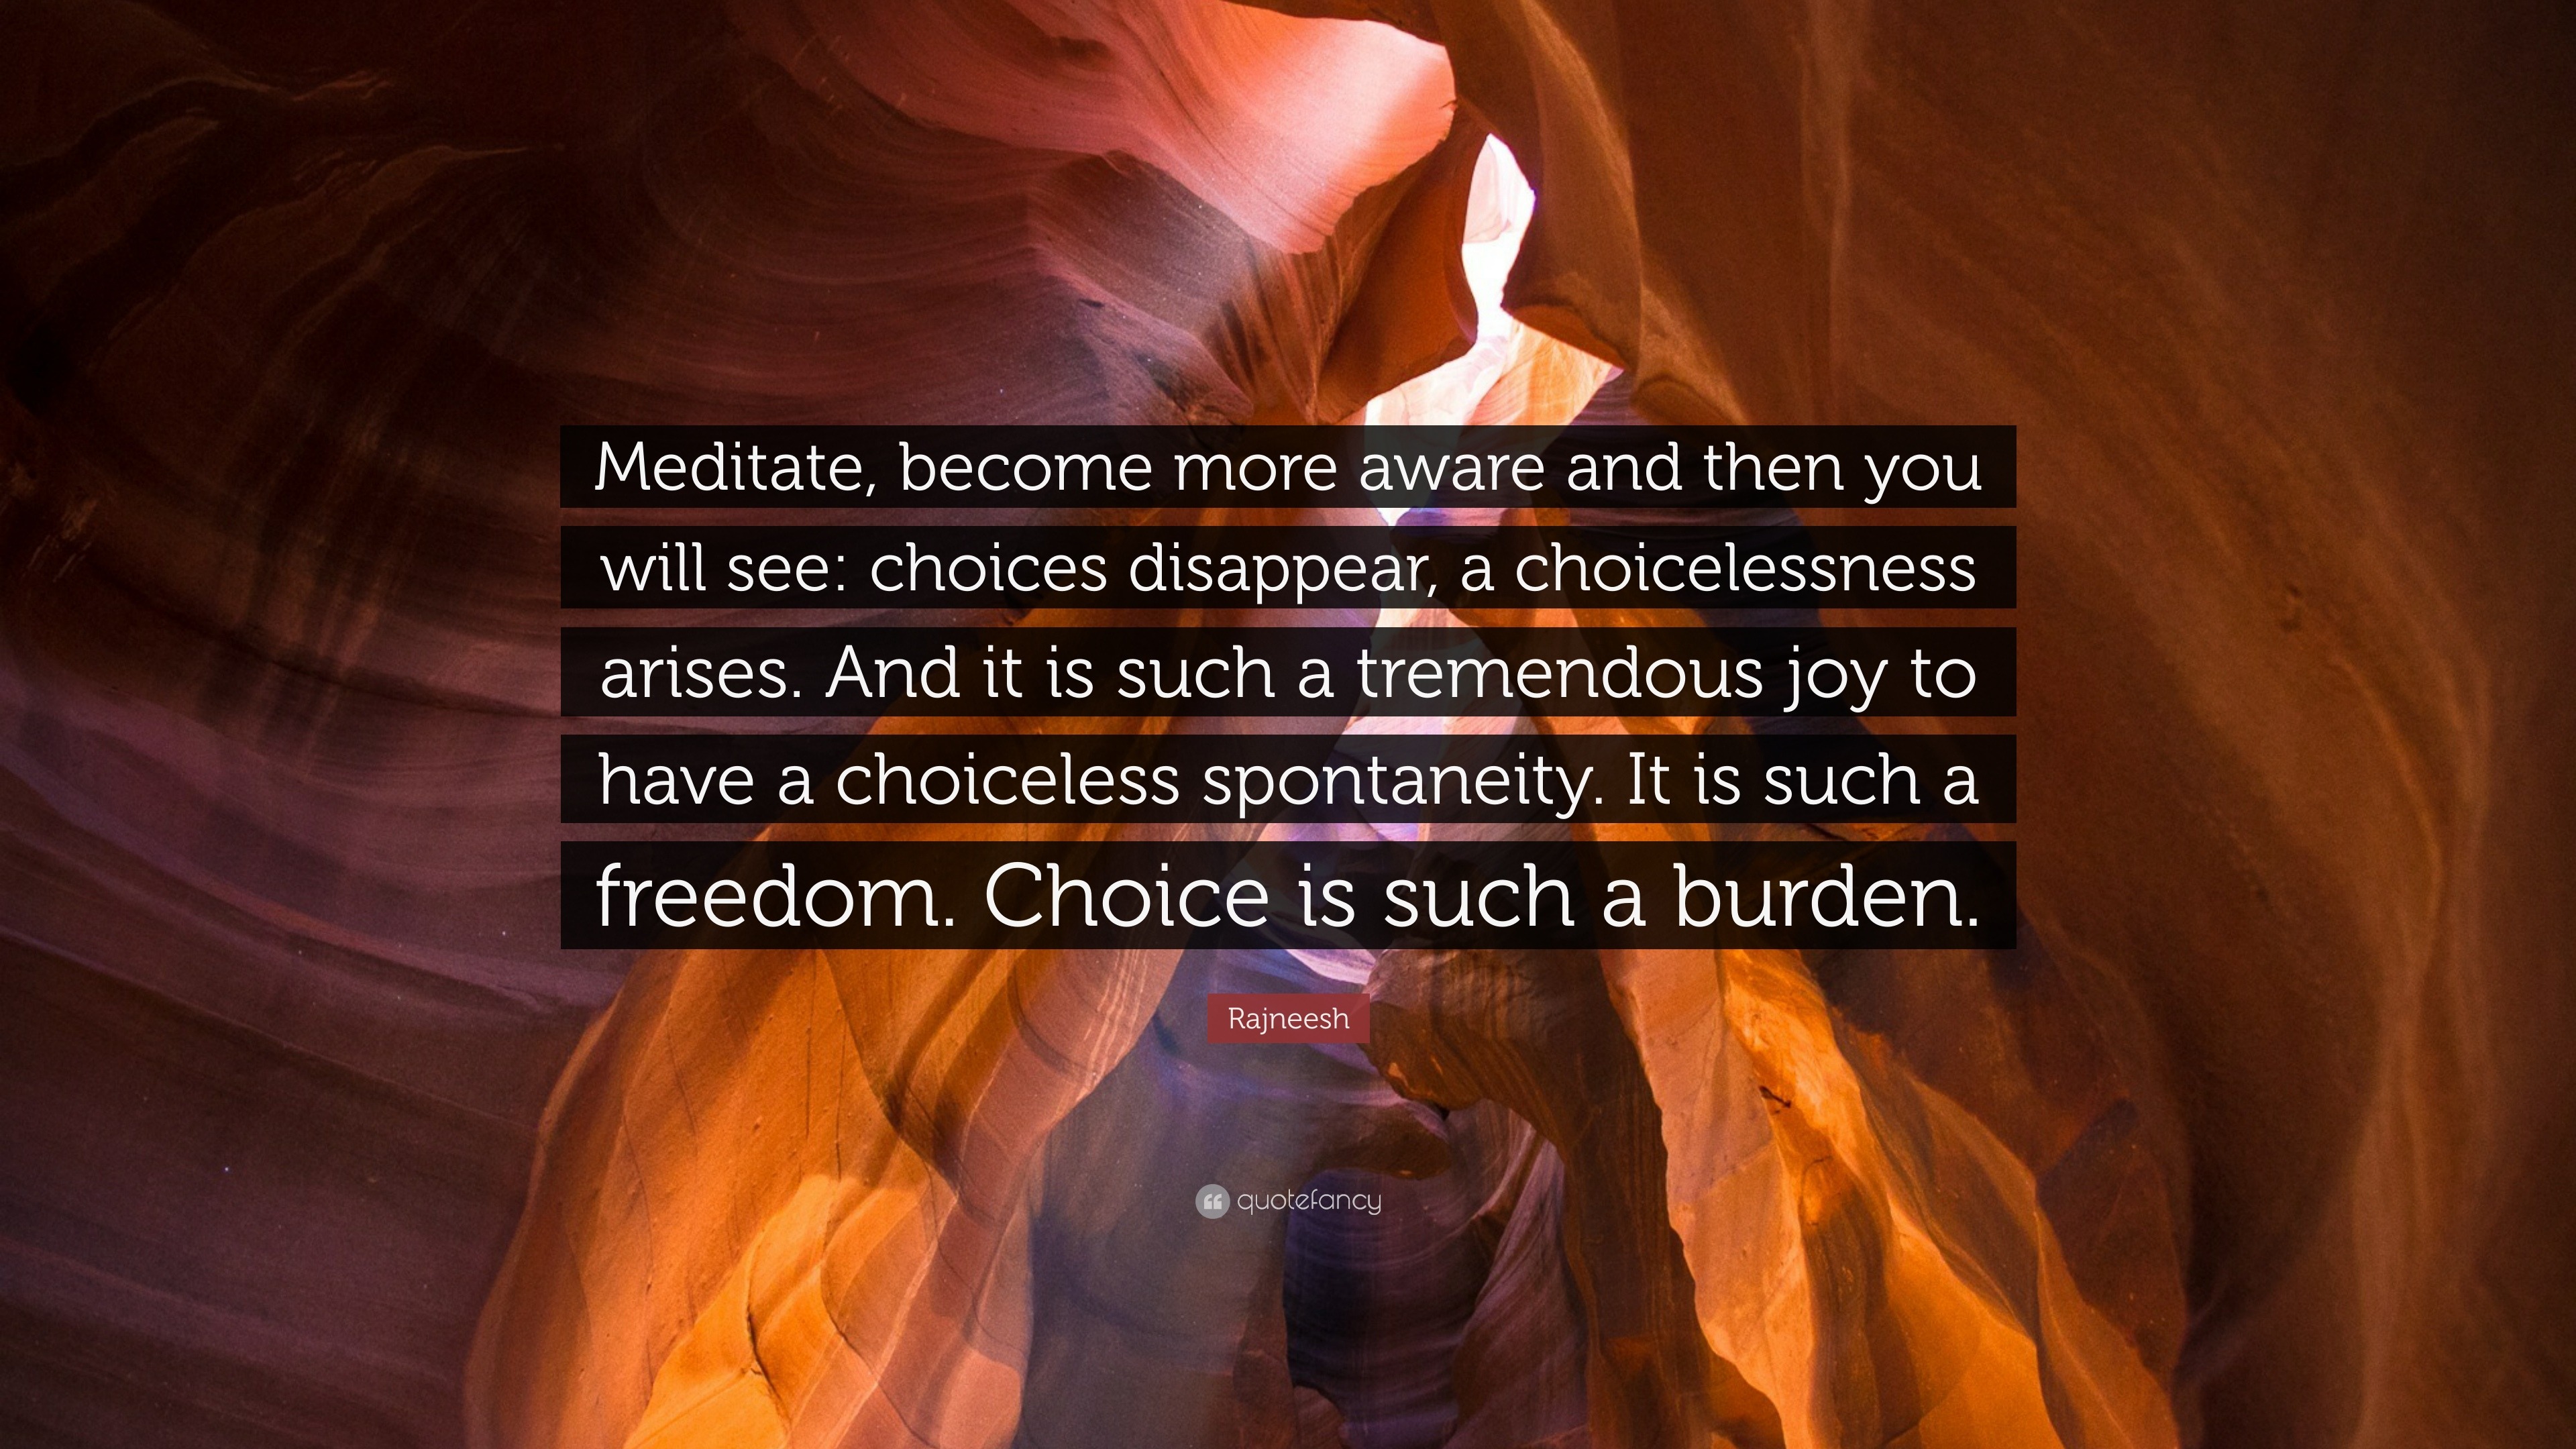 Rajneesh Quote “meditate Become More Aware And Then You Will See Choices Disappear A